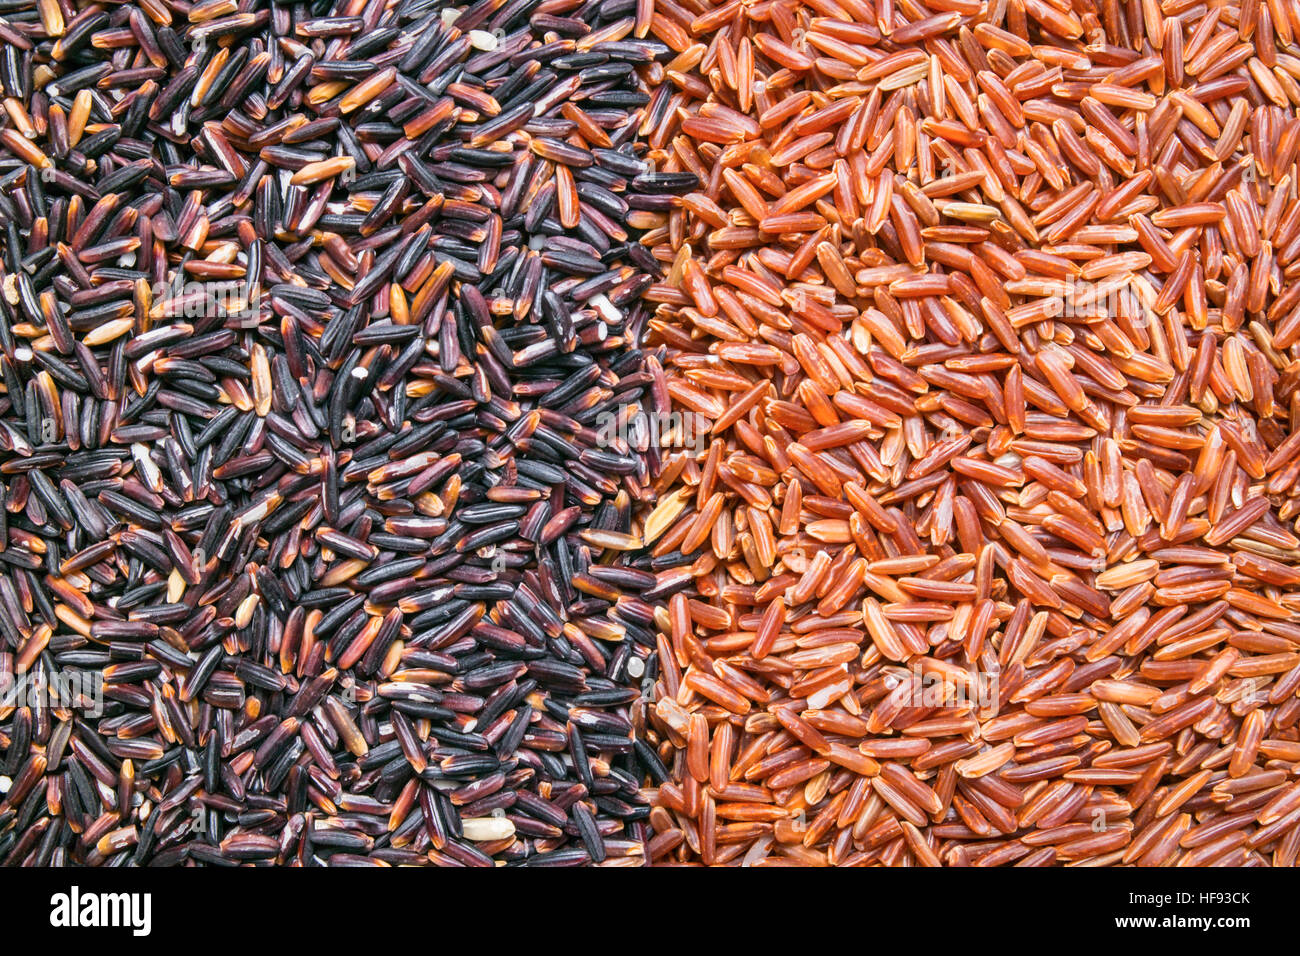 red, black rice background or texture Stock Photo